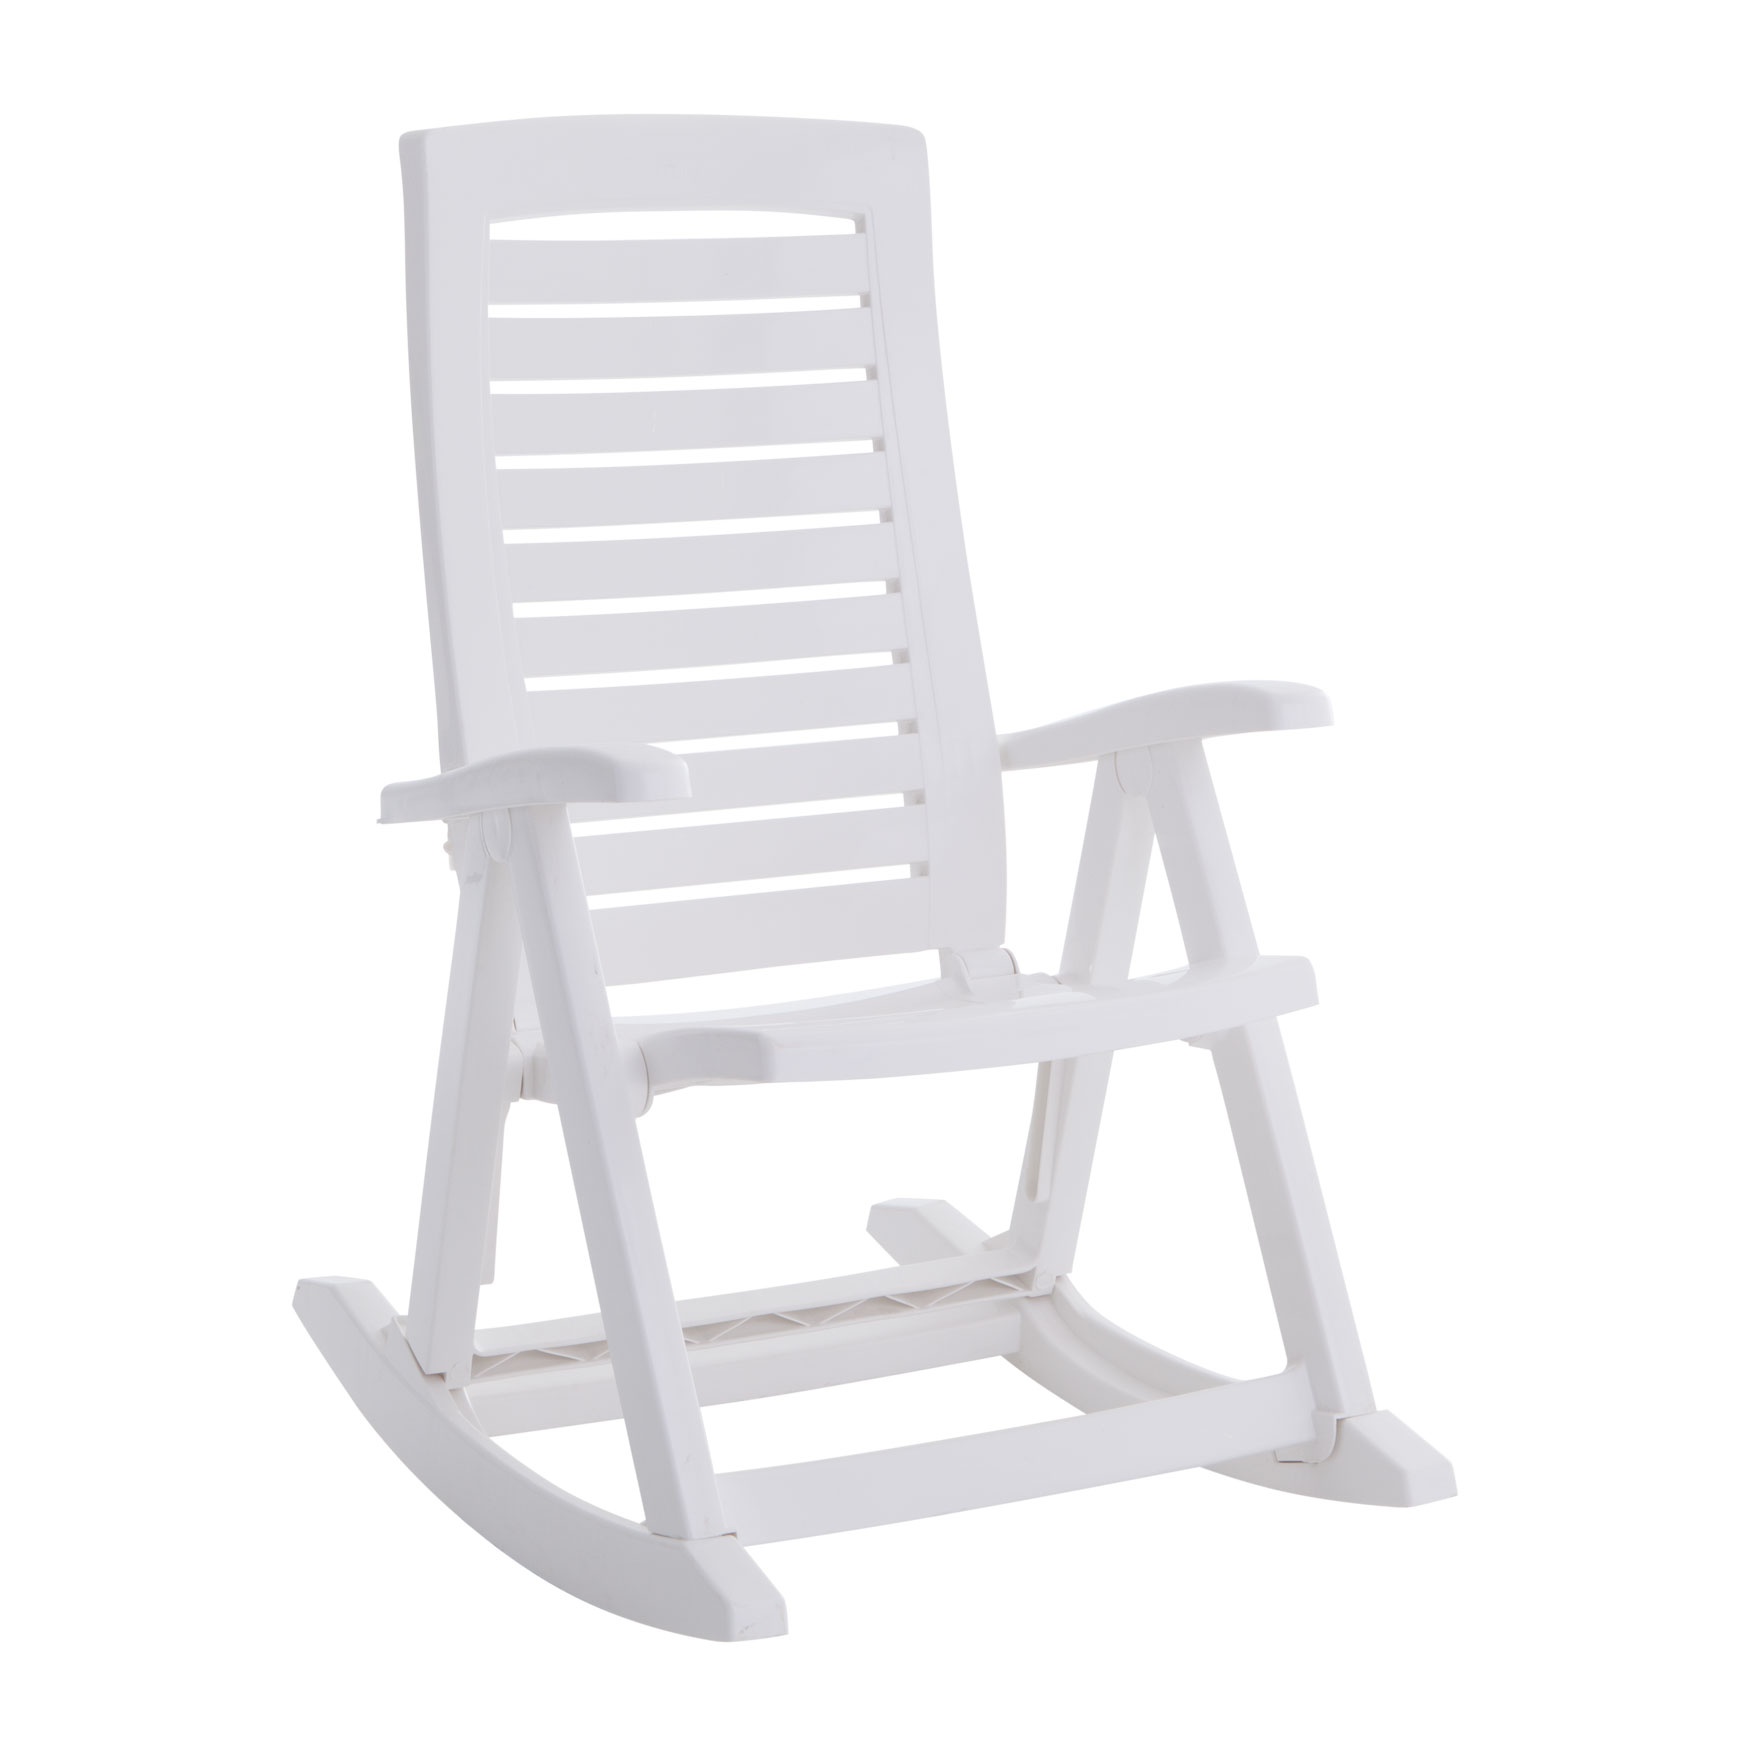  Foldable Rocking Chair, WHITE